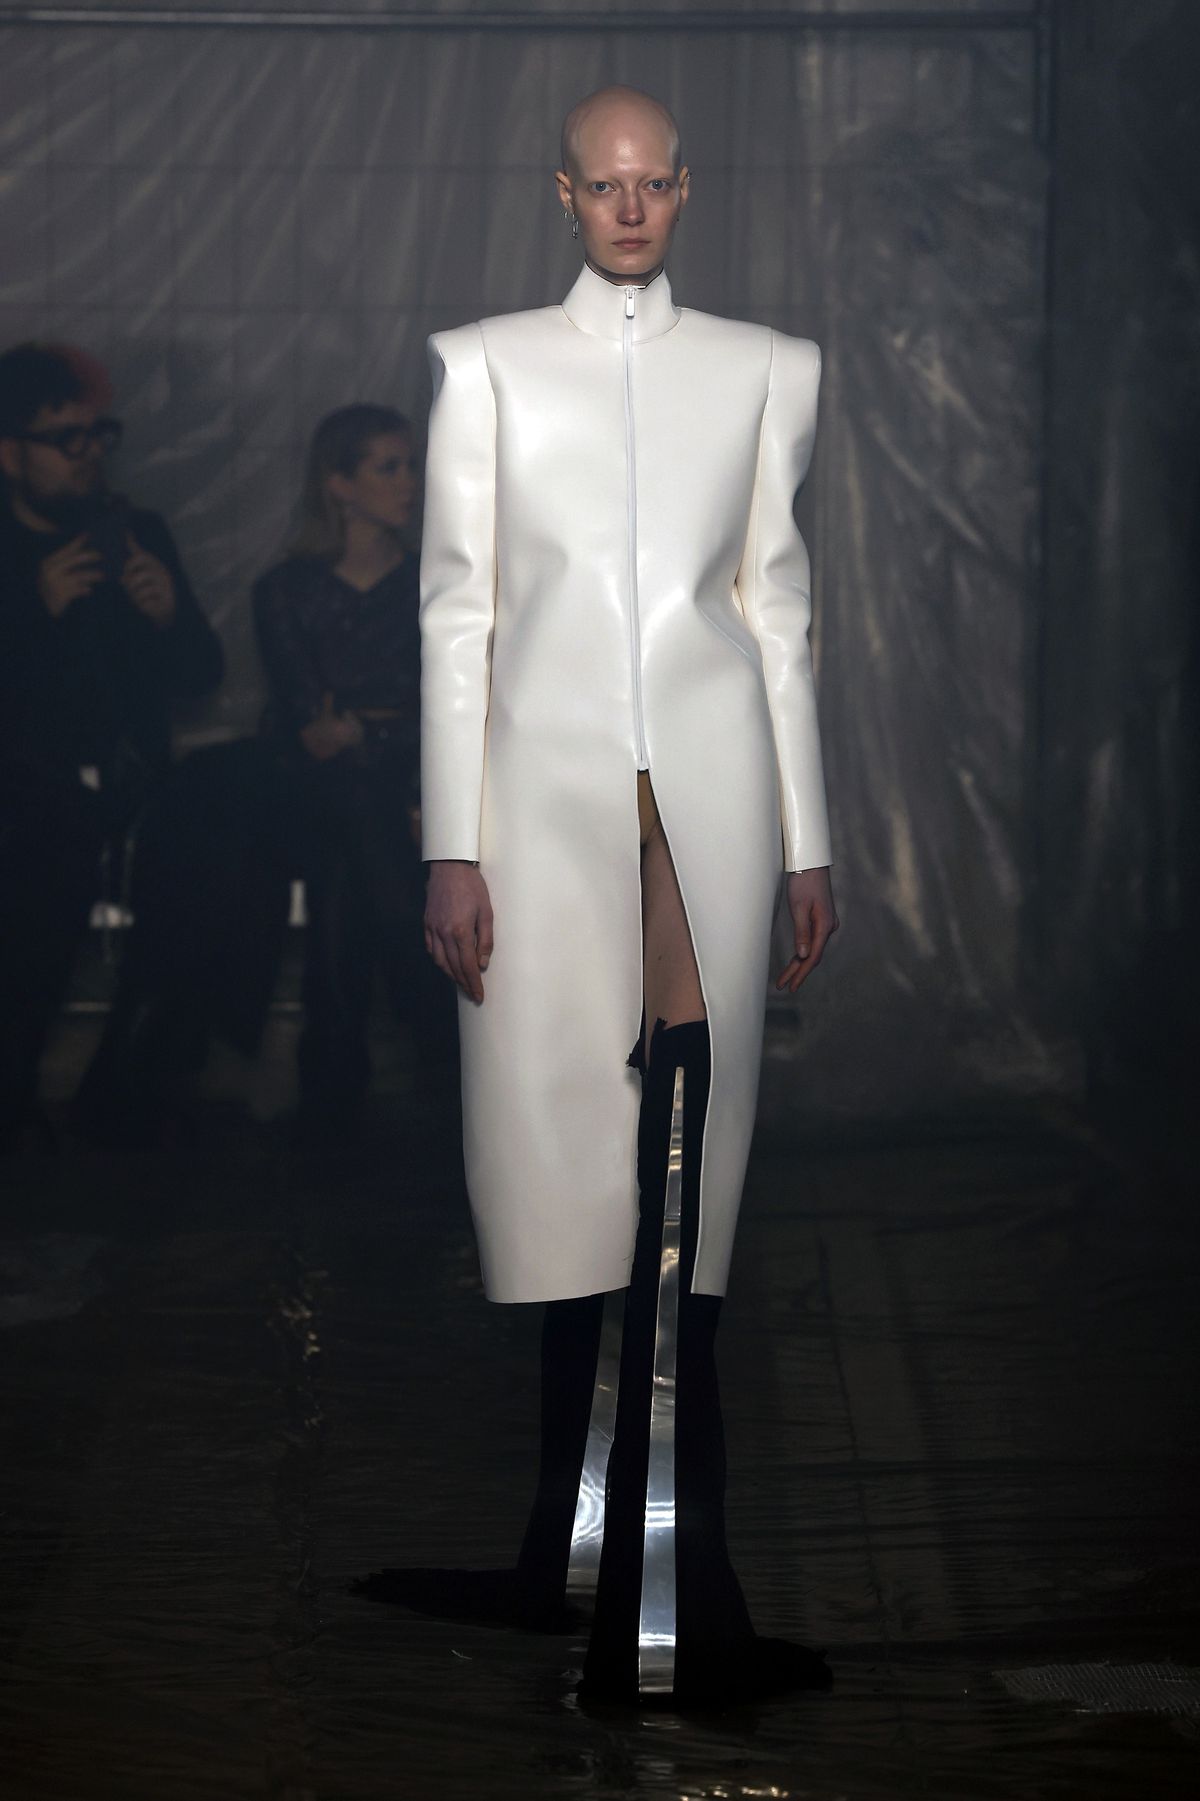 A model wearing a long white leather coat and stiletto heels walks the runway at the Han Kjobenhavn fashion show at Milan Fashion Week.